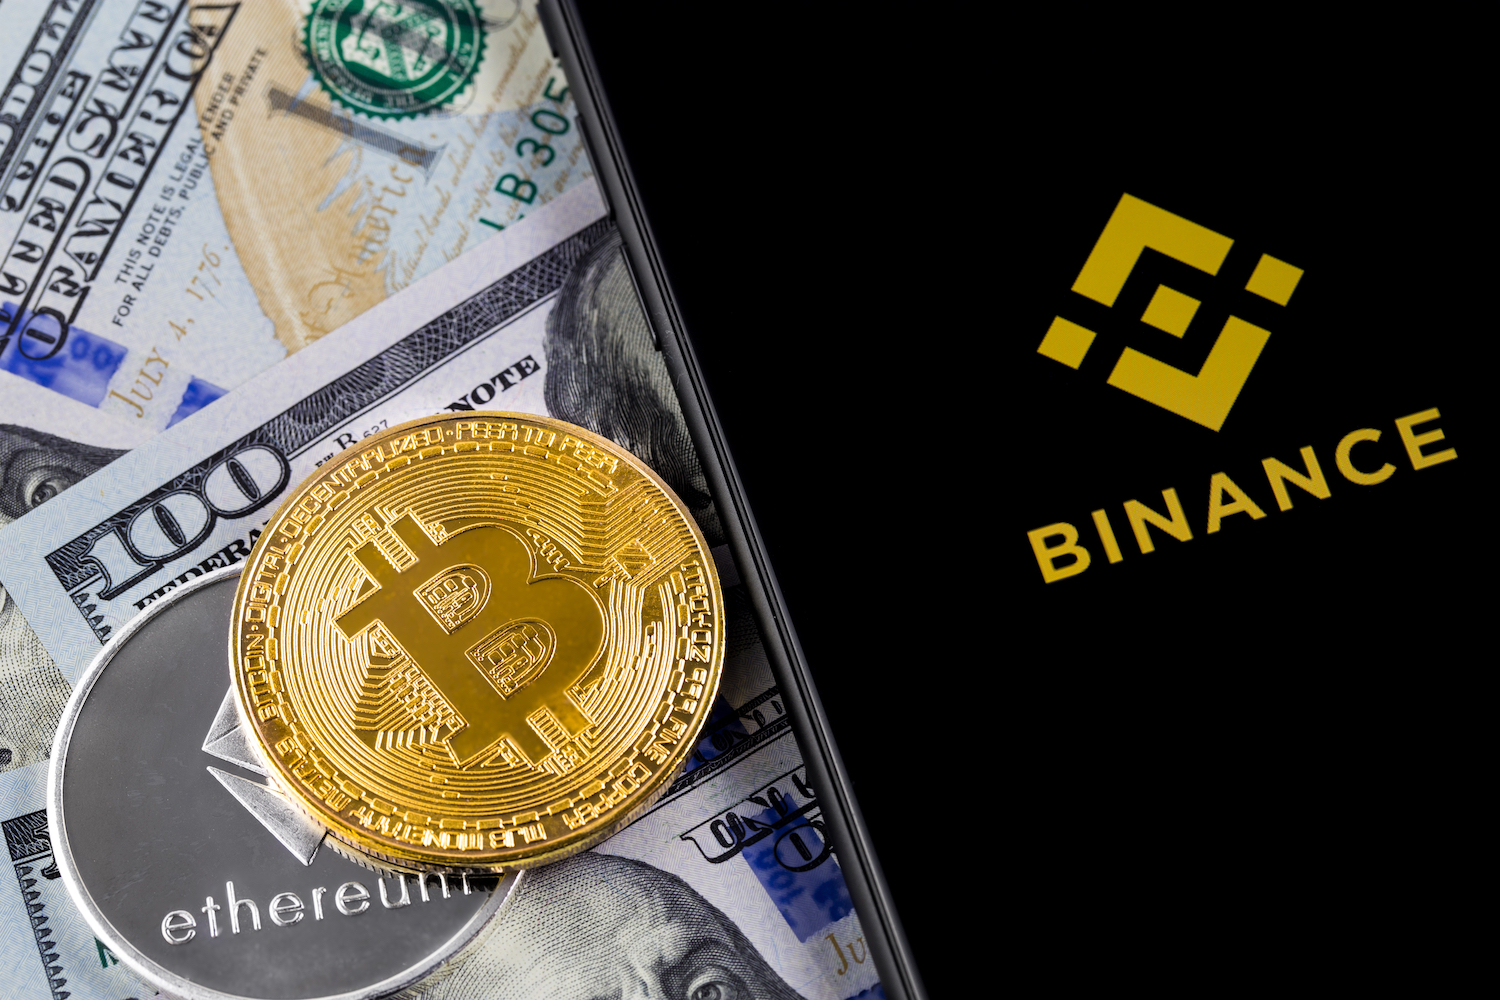 Binance Says It’s Launching A US Exchange With FinCEN-Registered Partner